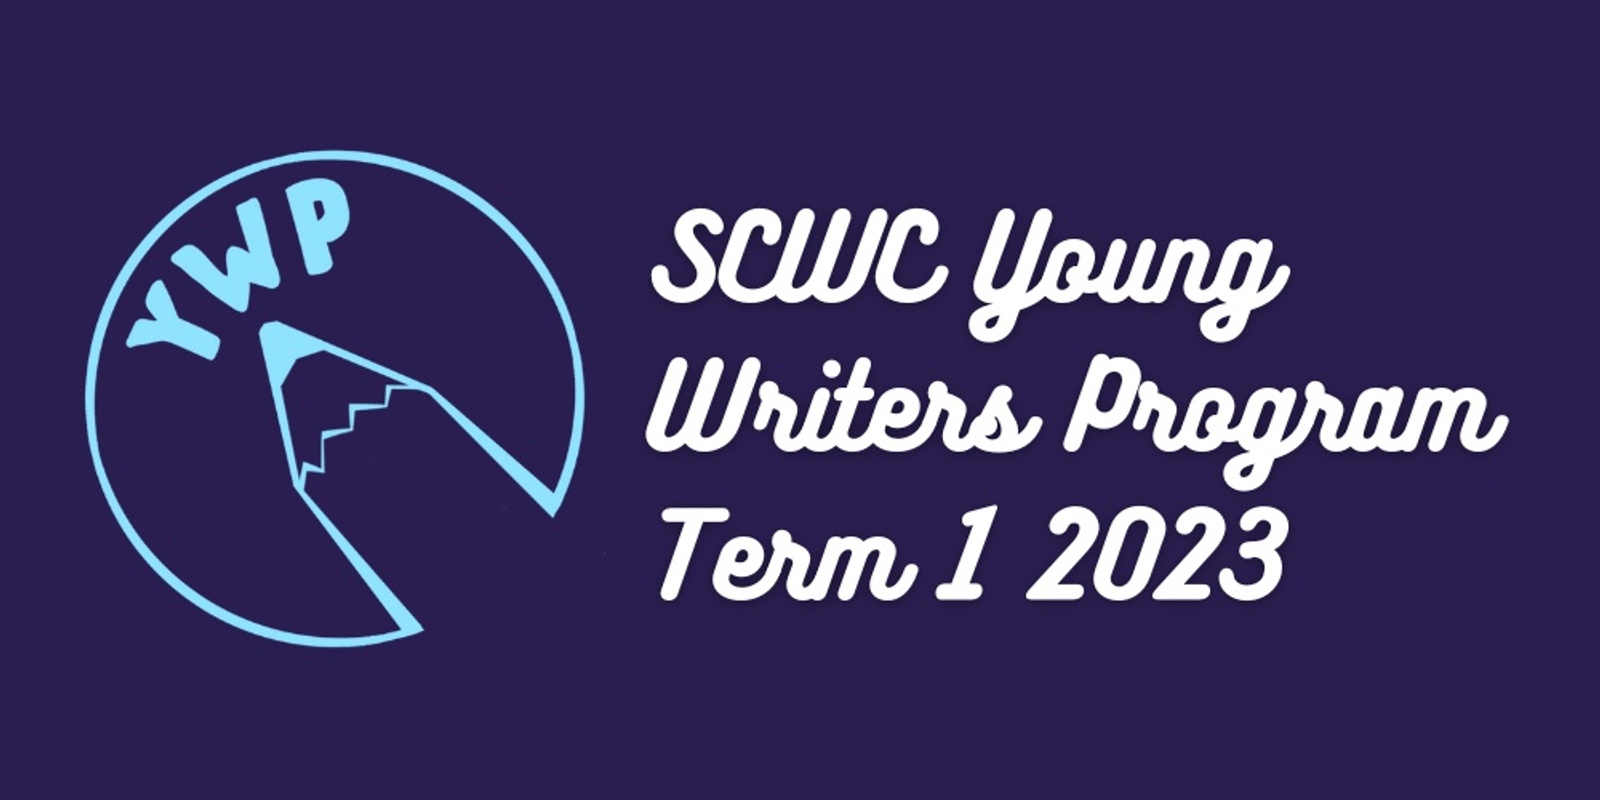 Banner image for SCWC Young Writers Groups - Term 1 2023